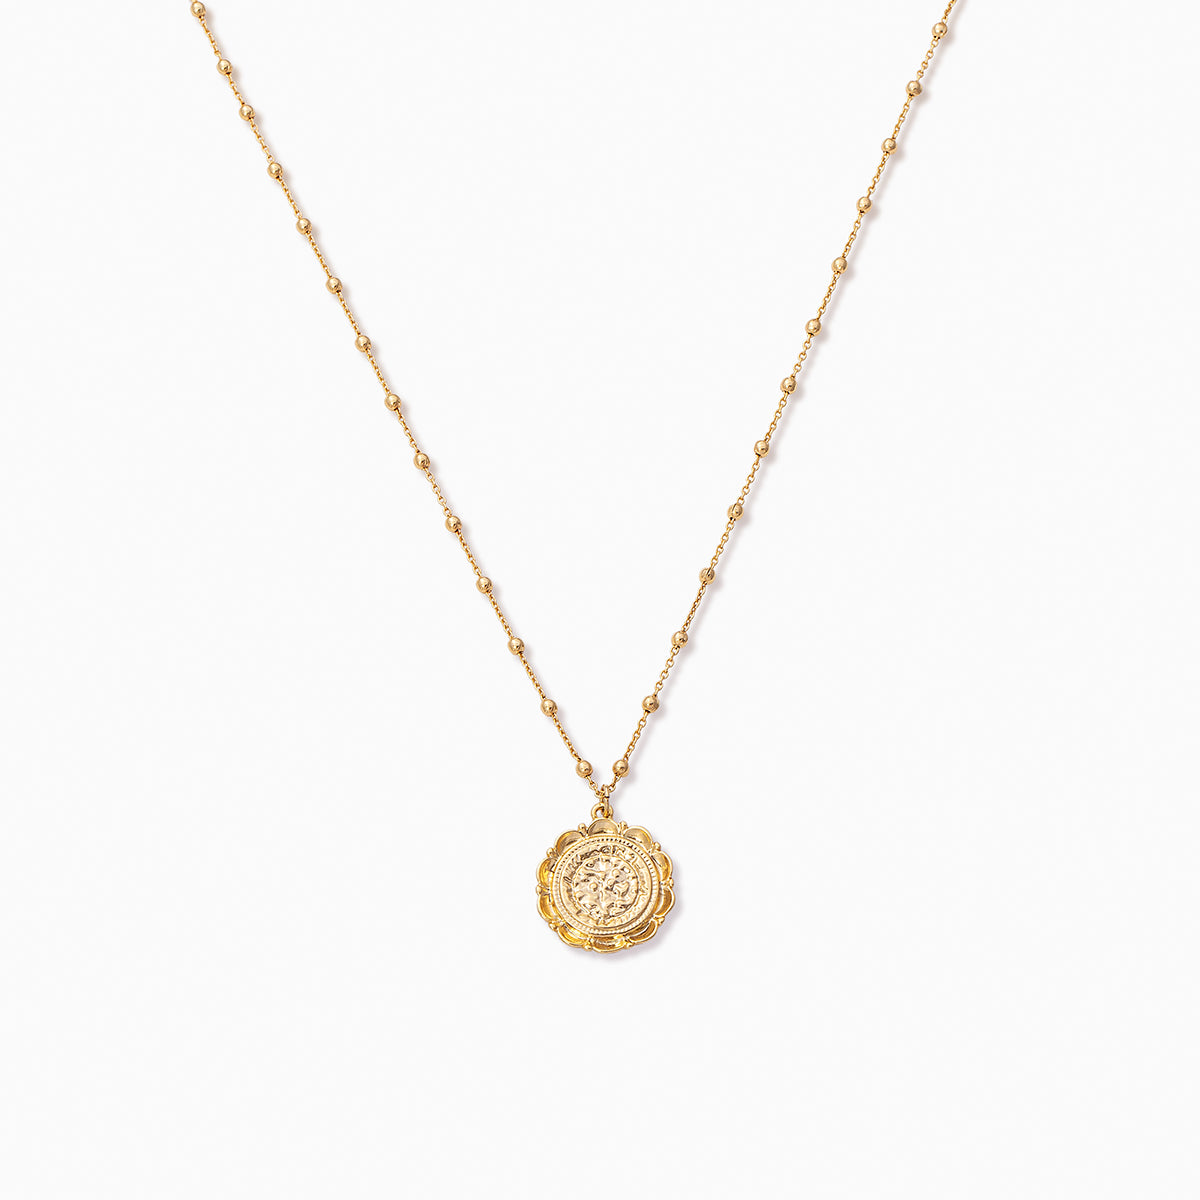 Atocha Necklace Small | Gold | Product Image | Uncommon James